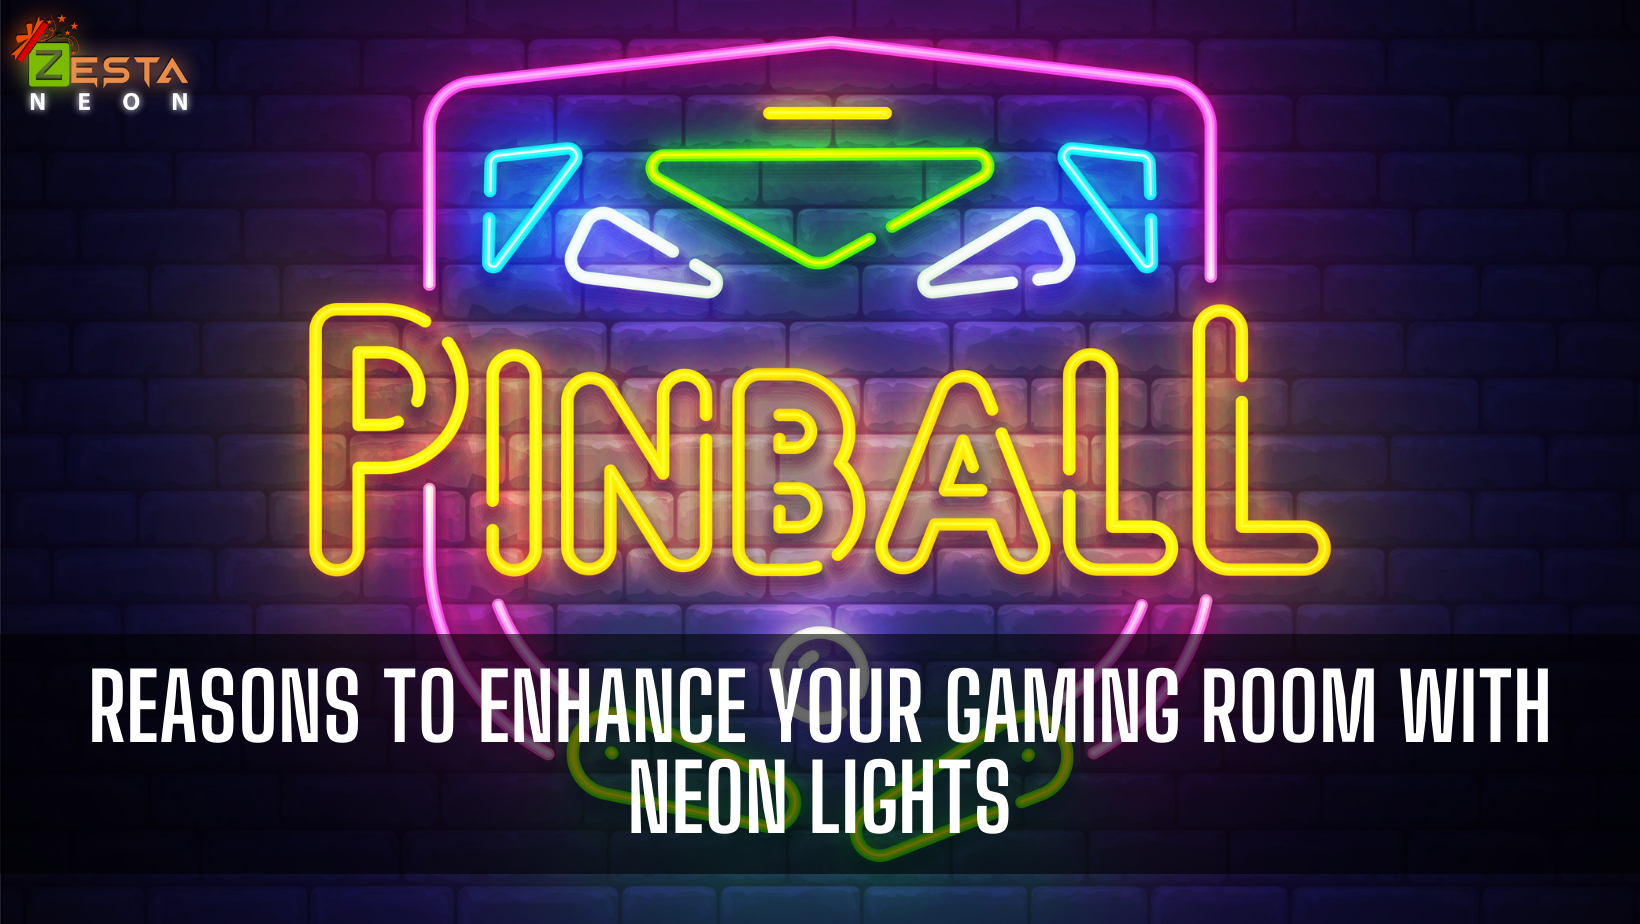 Neon lights for your gaming room